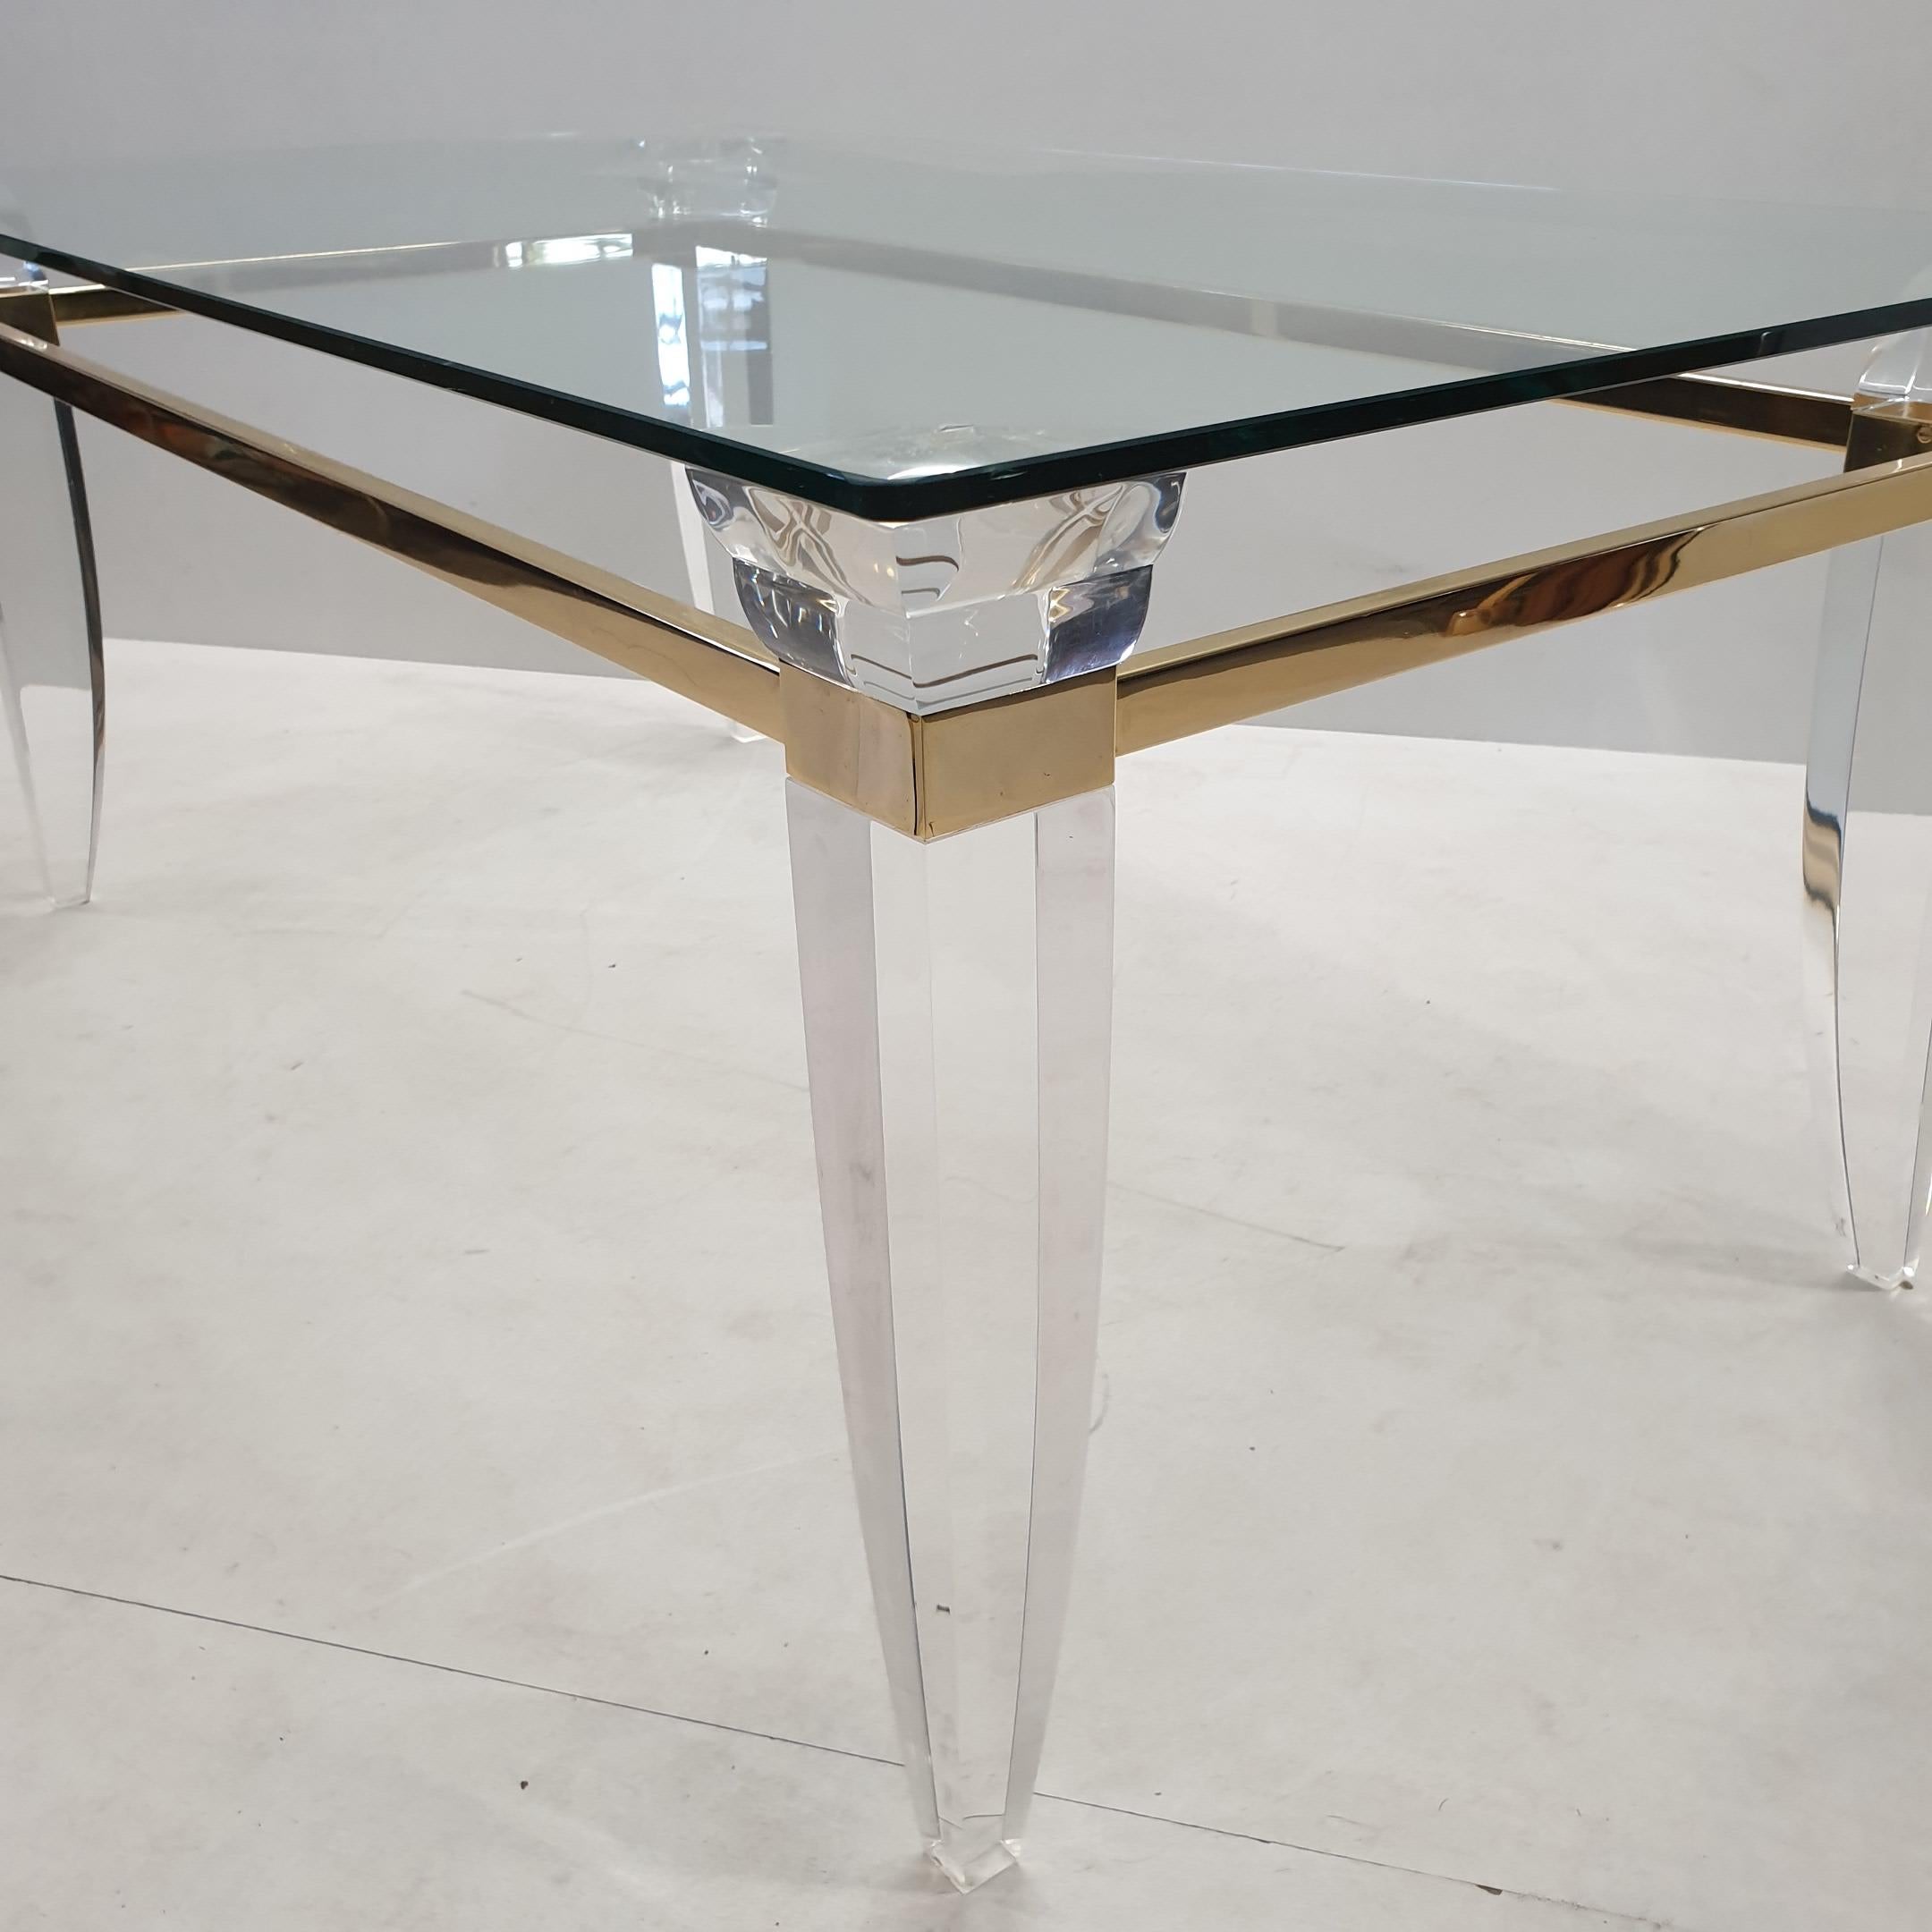 Hollywood Regency Lucite, Gold Plating and Glass Coffee Table with Assymetrical Table Legs, 1980s For Sale